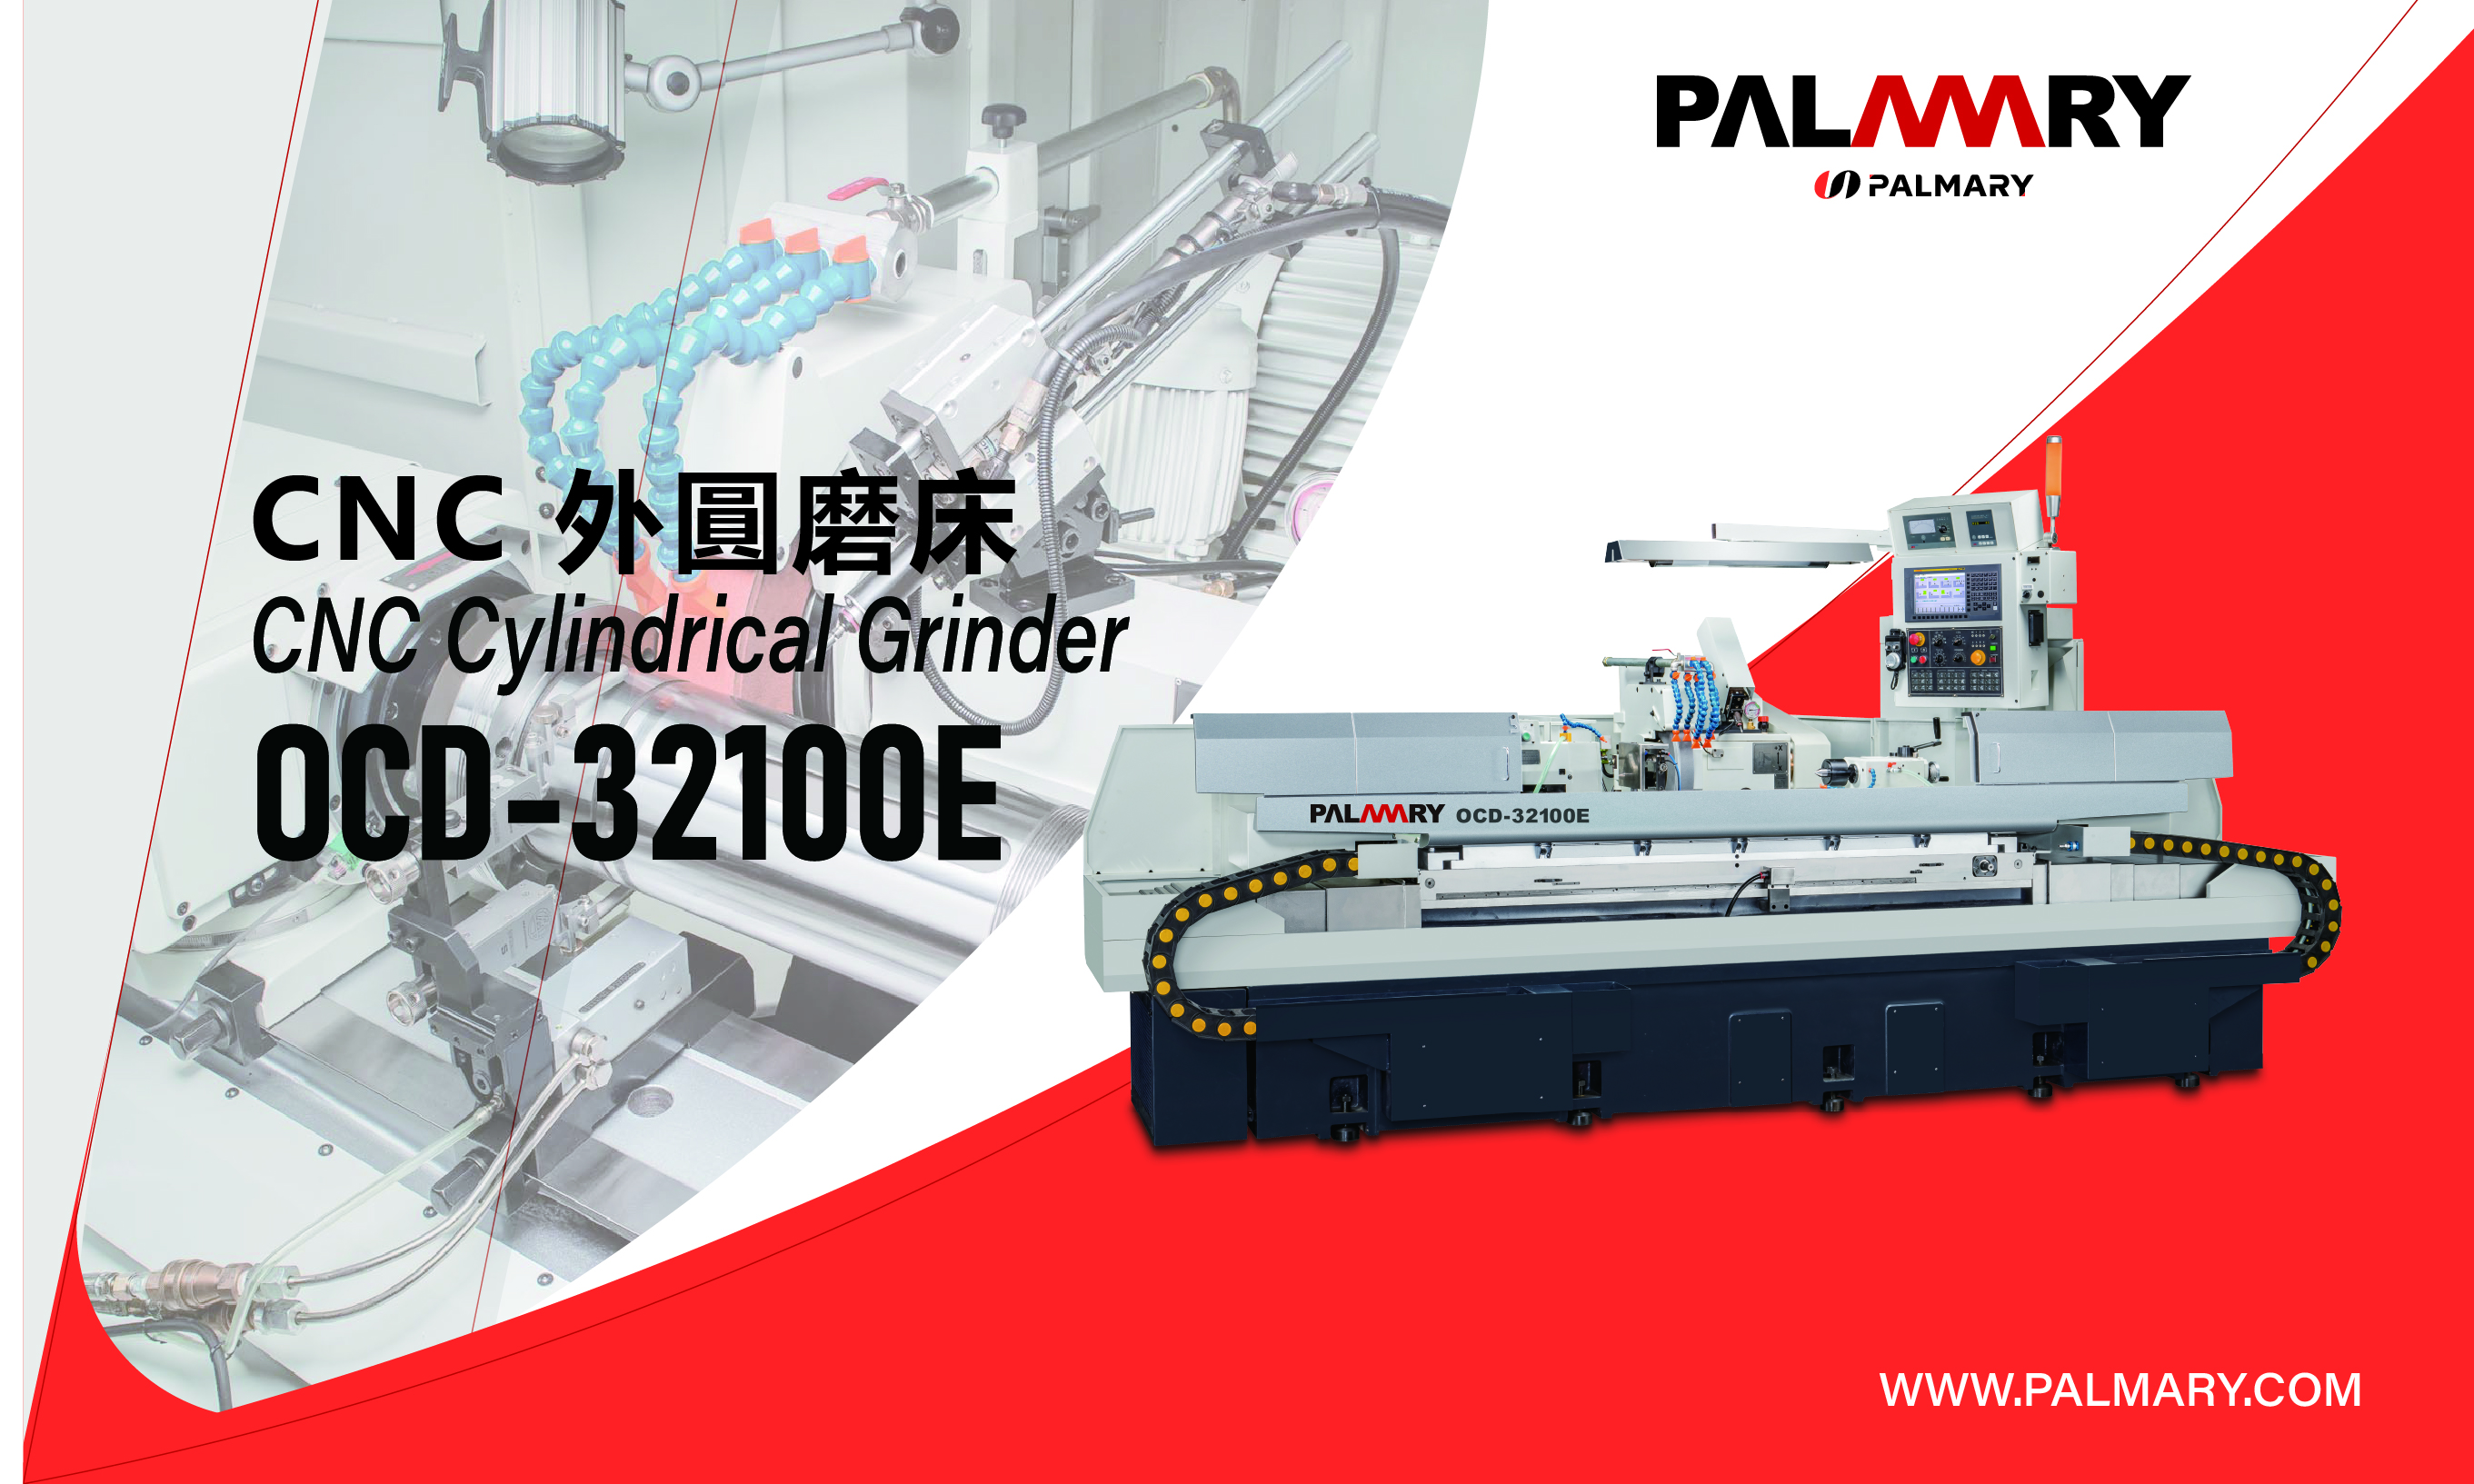 Catalog|Palmary CNC Cylindrical Grinder (Special Grinder for Spindle) OCD-32100E (2106N1)